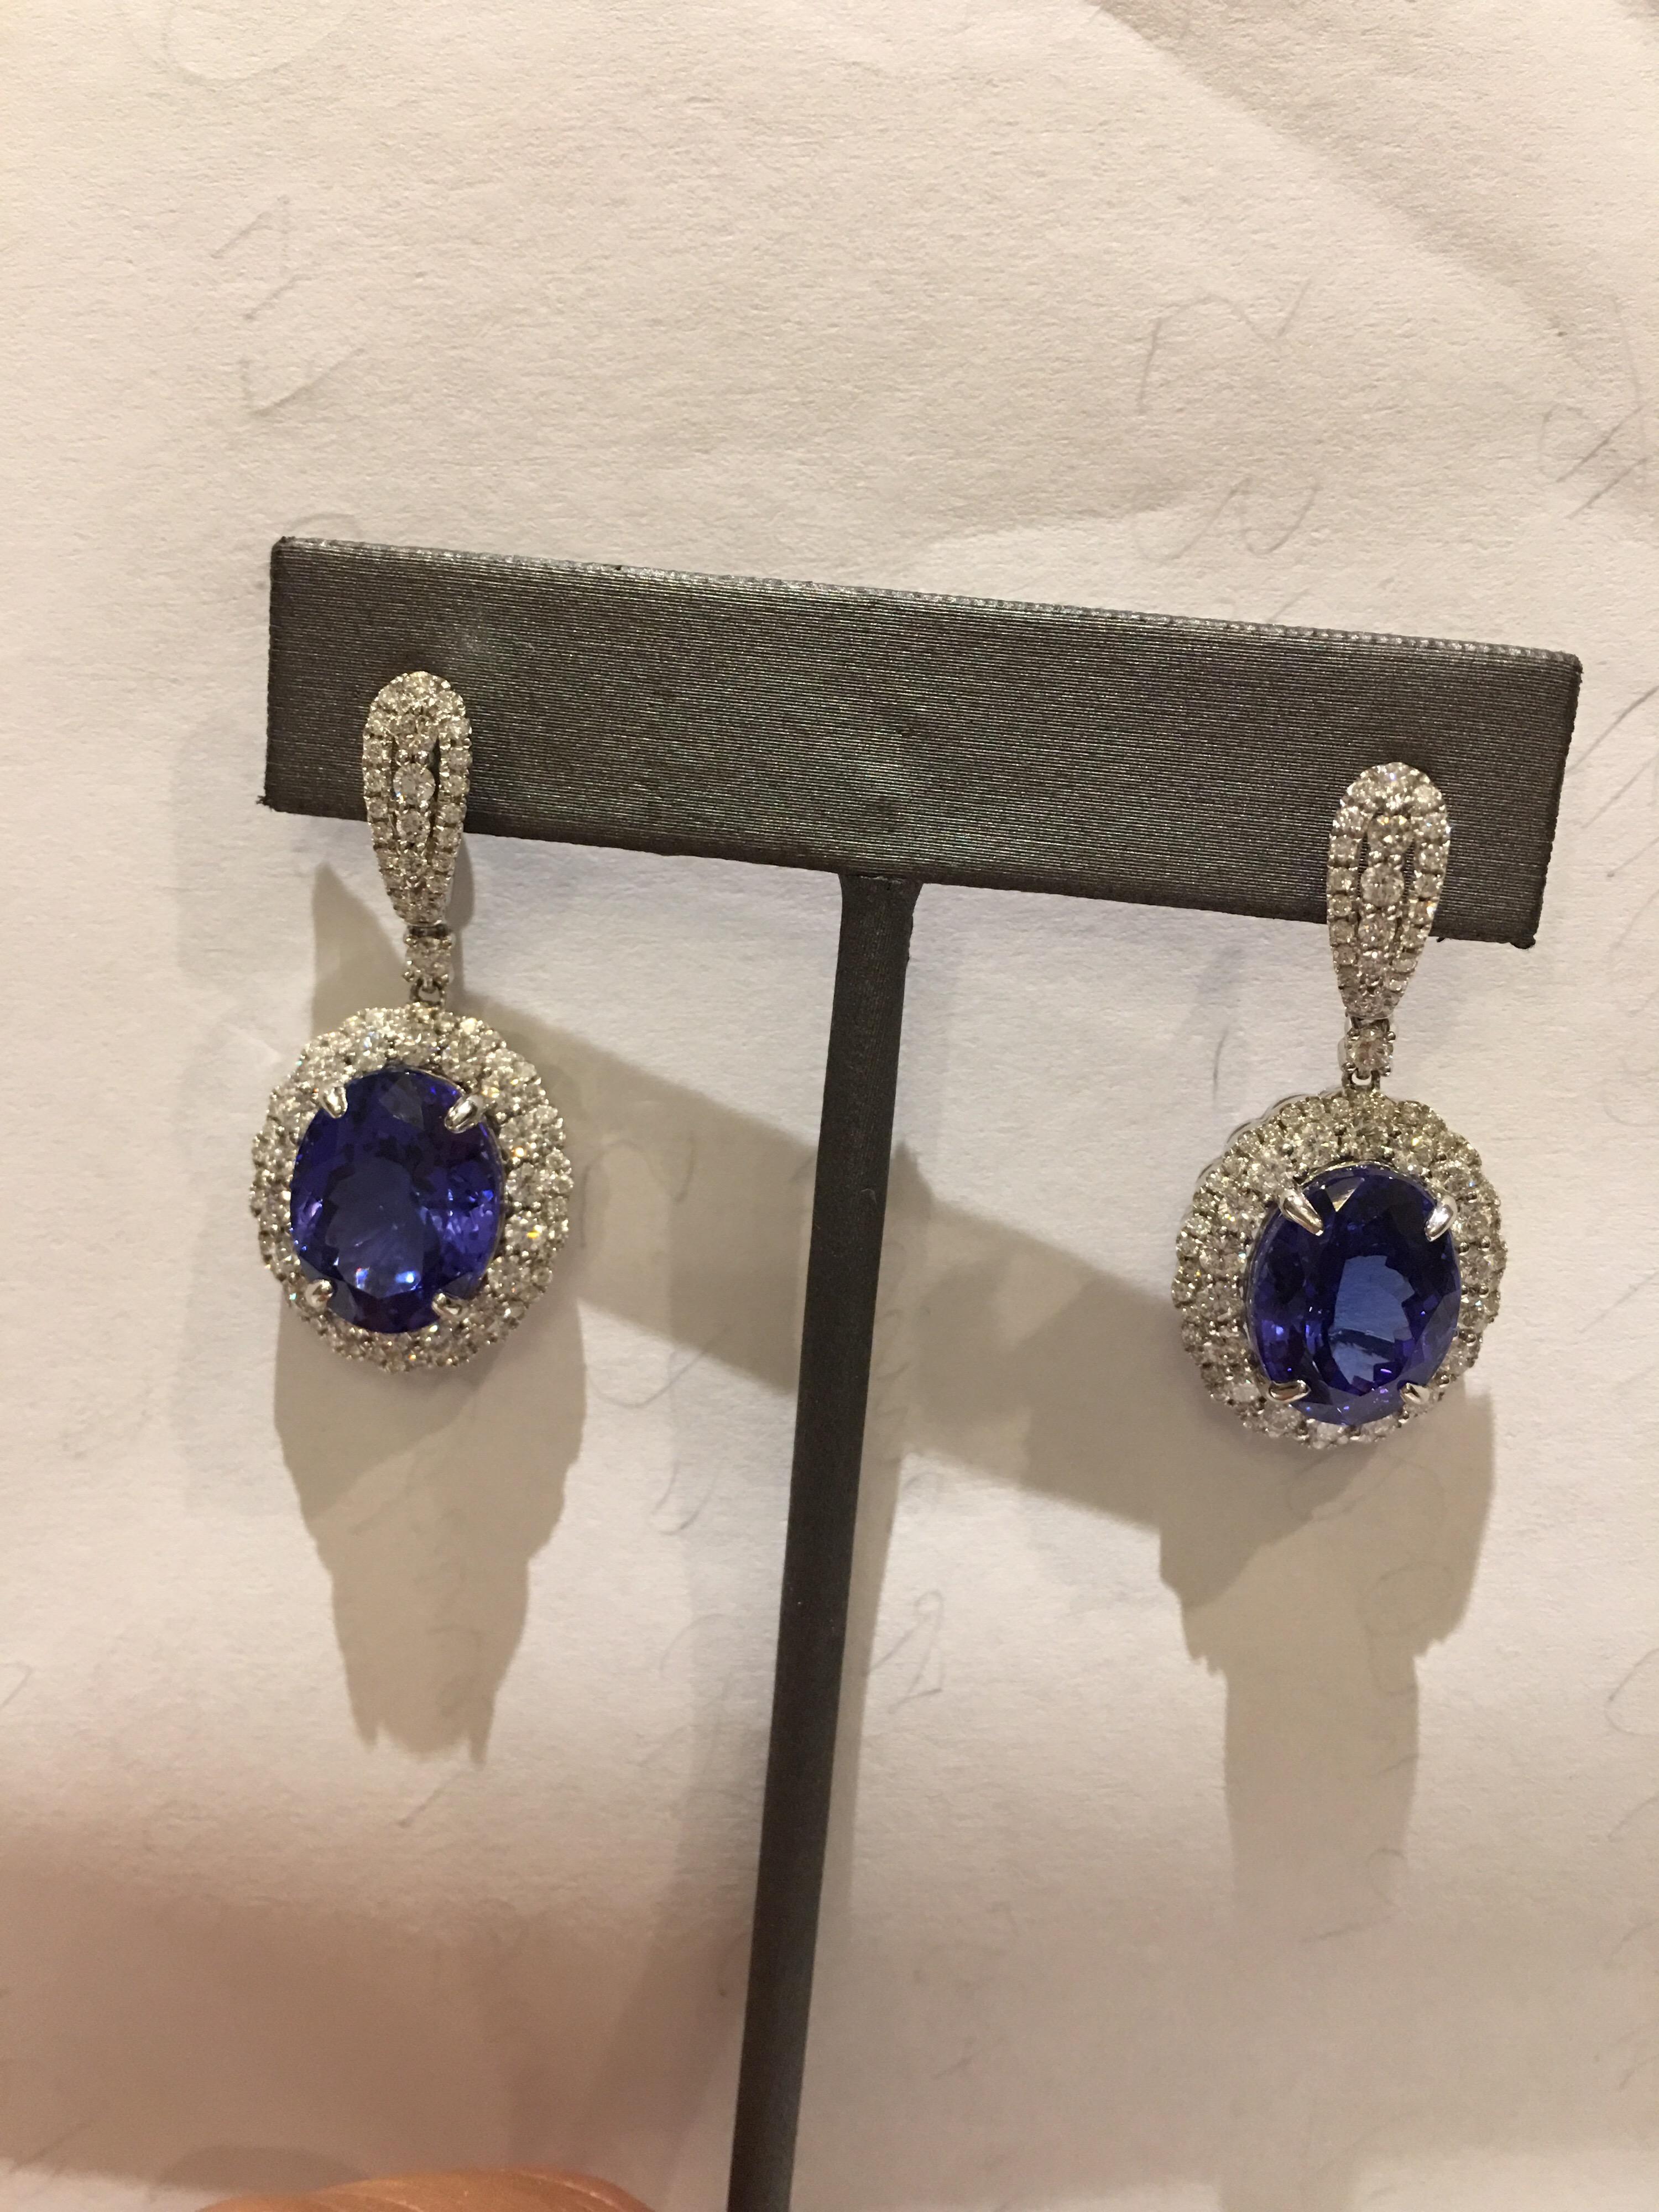 Natural AAA Quality and Royal Ink Blue Tanzanite set in 14 Karat white Gold .
Total weight of Tanzanite is 14.00 Carat and White round diamonds is 2.73 Carat.